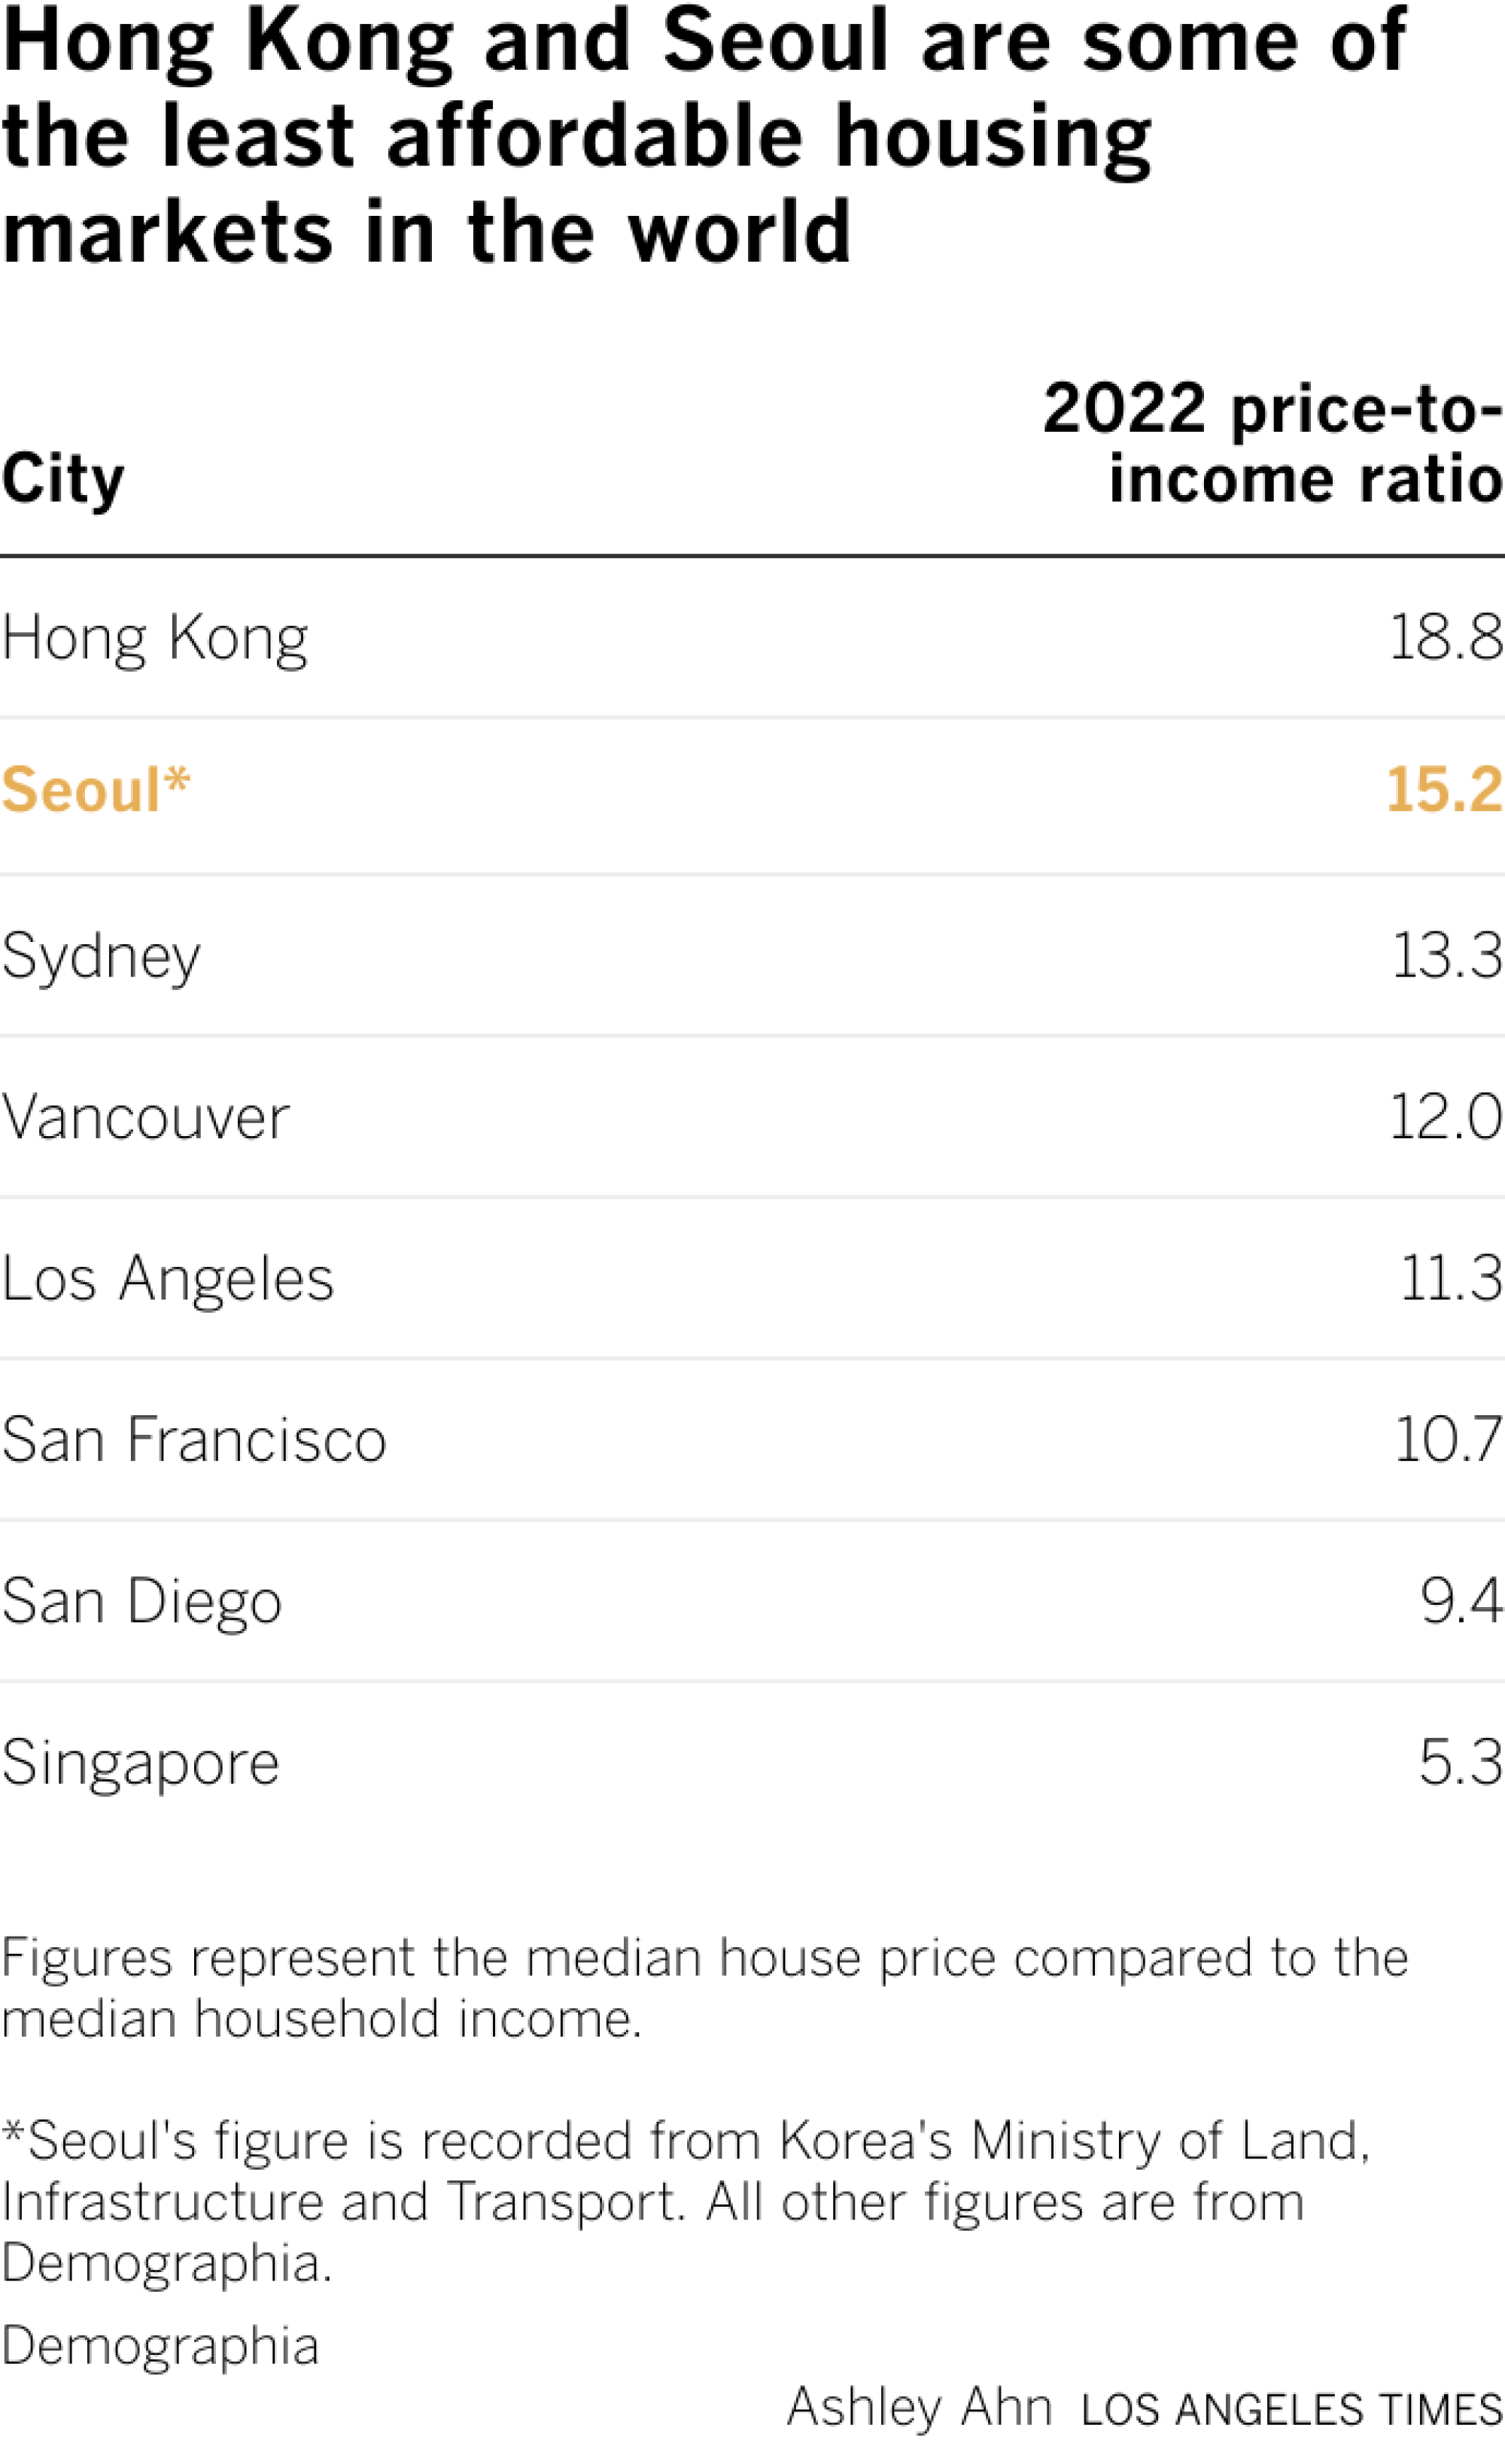 Hong Kong and Seoul are some of the least affordable housing markets in the world